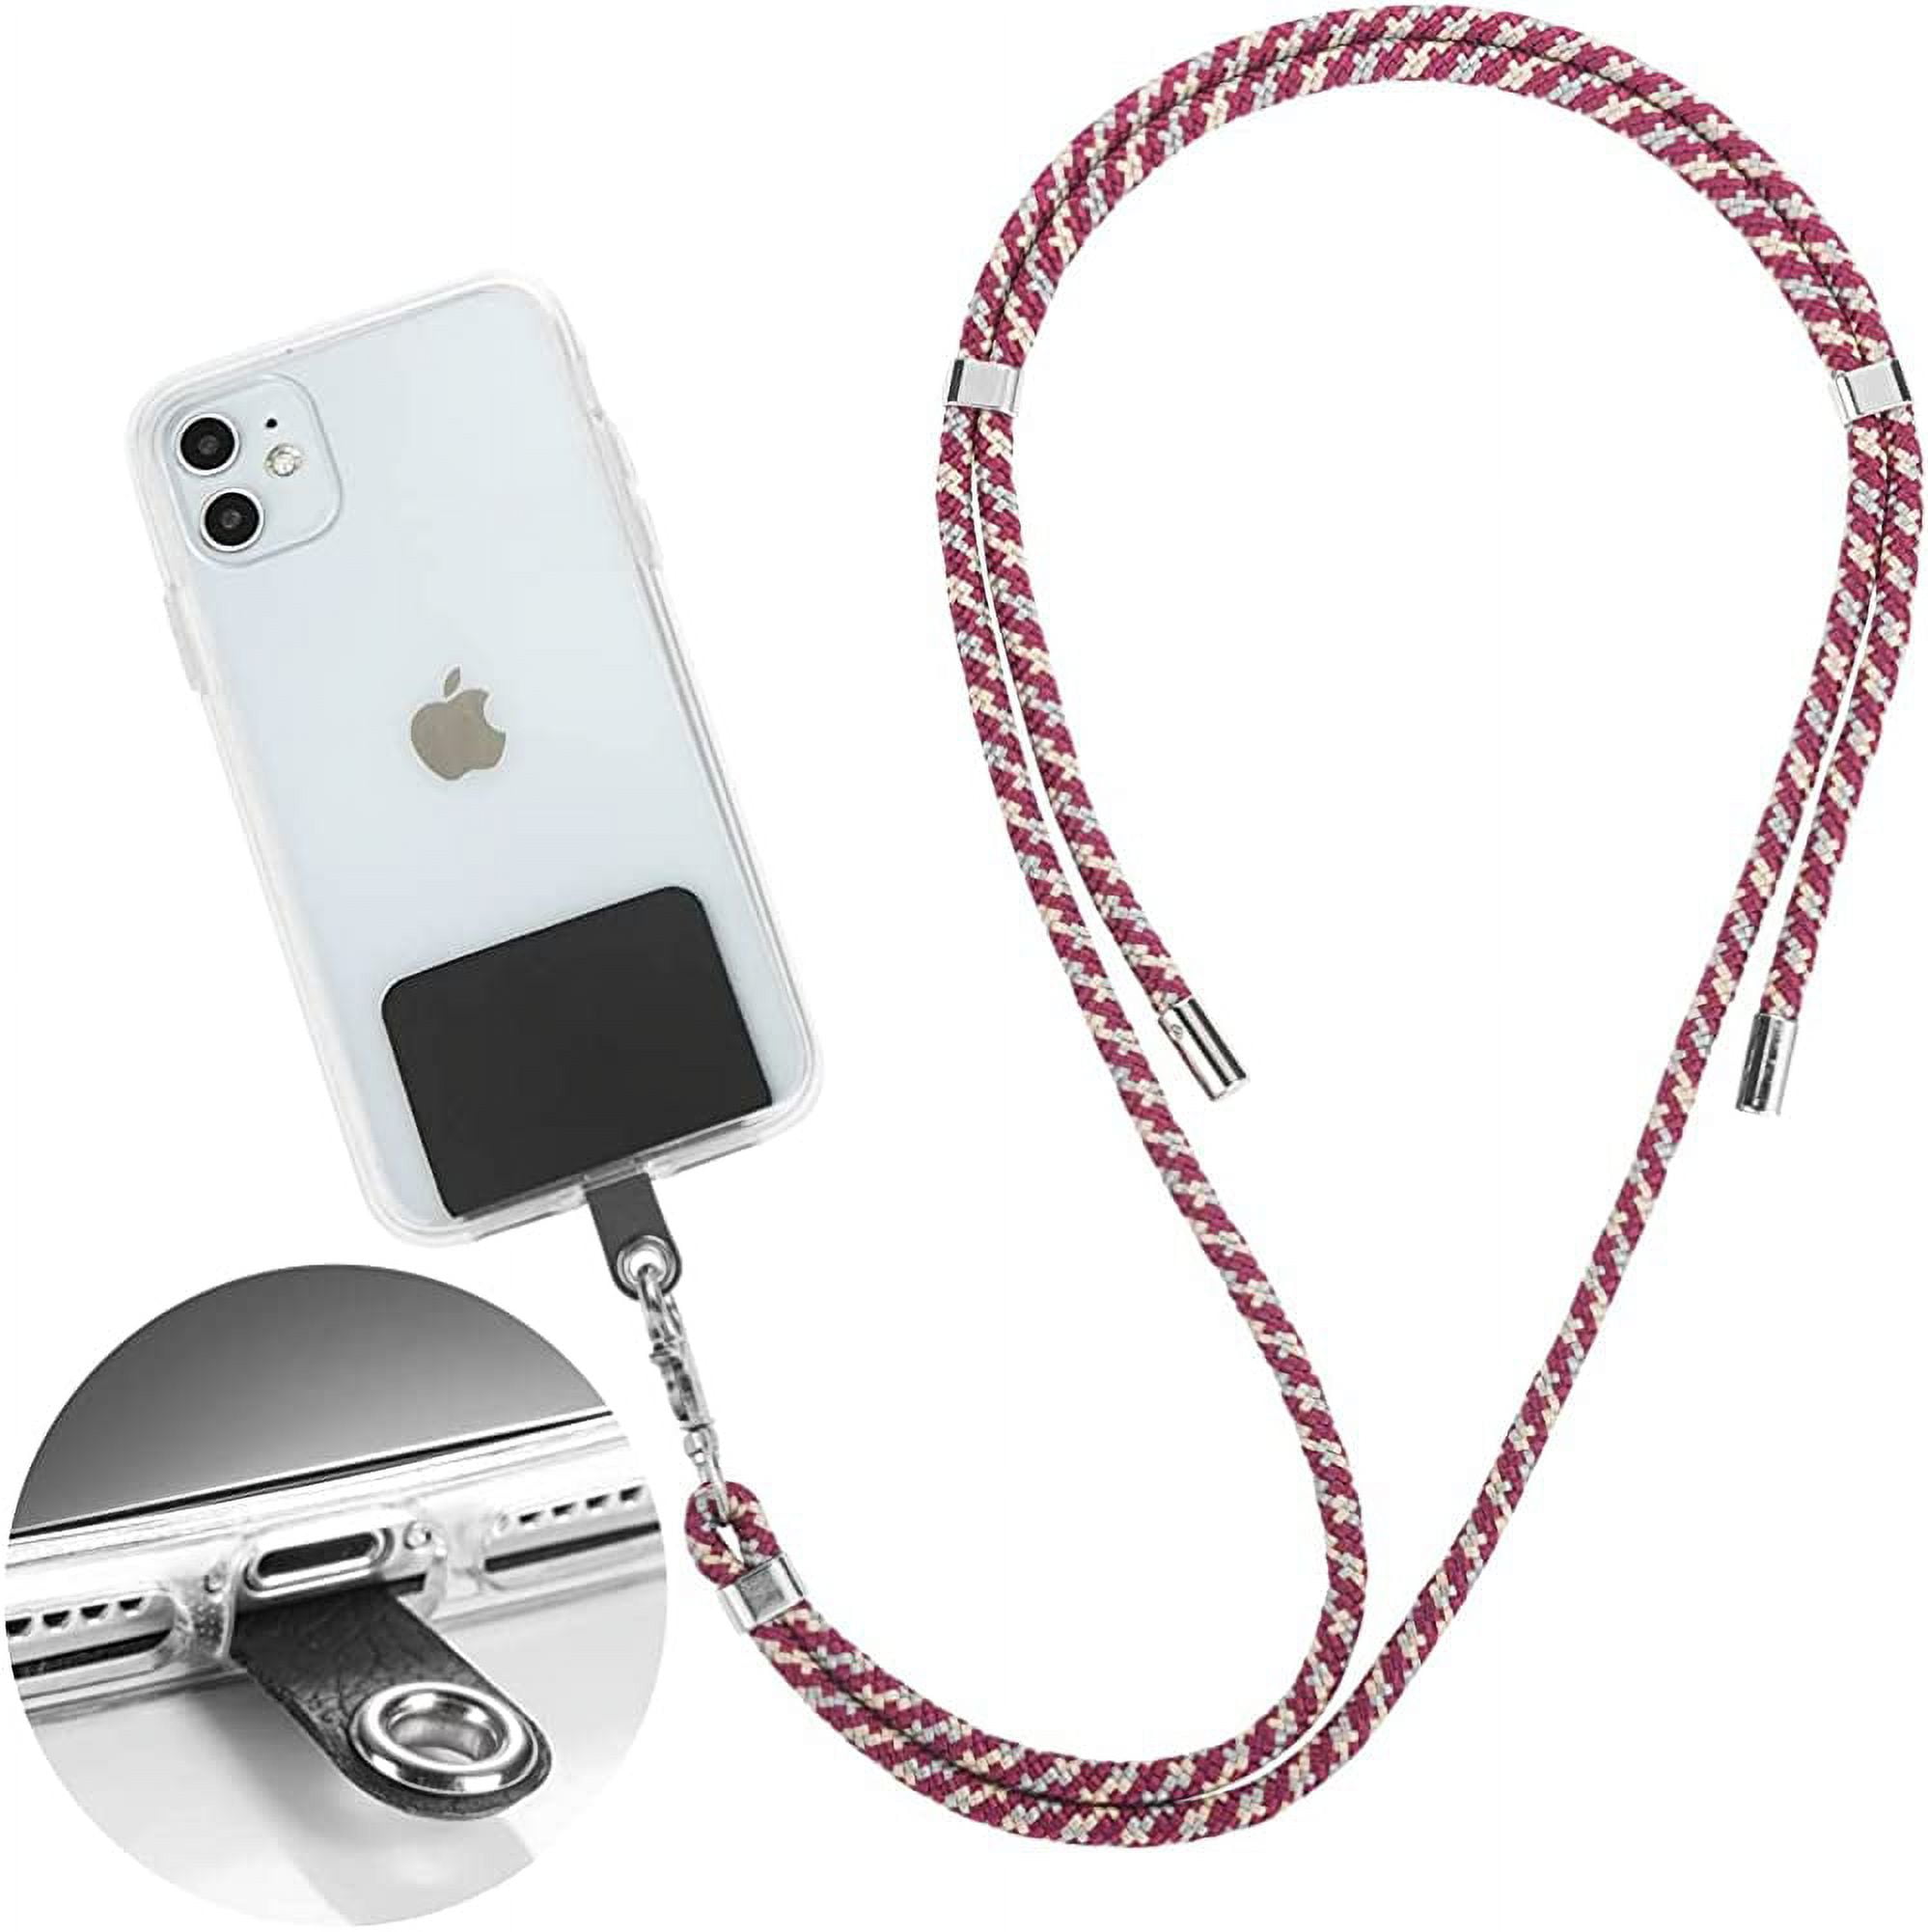 Necklace strap for mobile phone : r/avoidchineseproducts